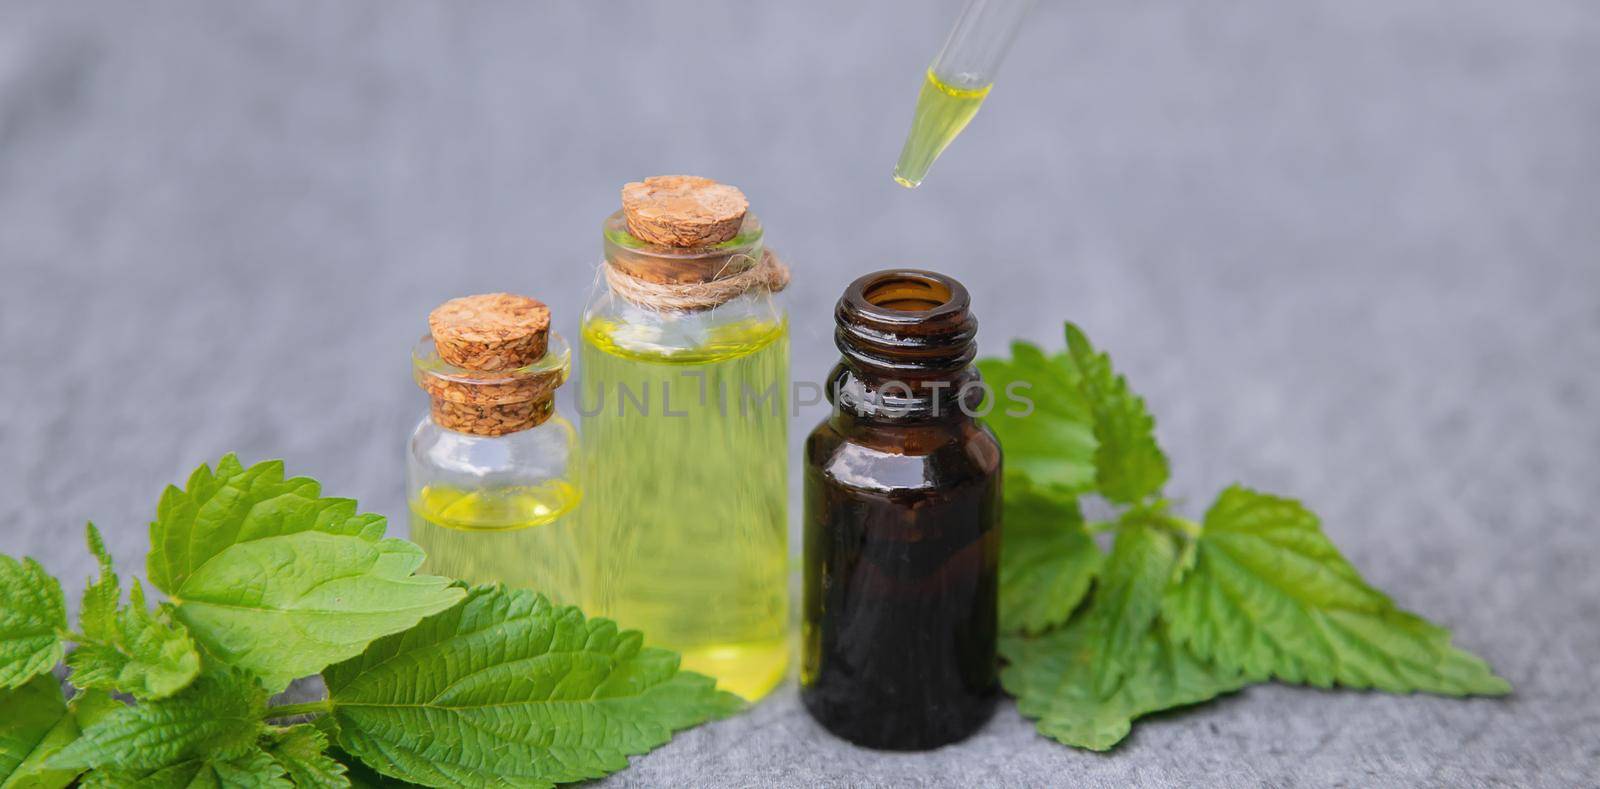 nettle extract in a small jar. Selective focus. by mila1784